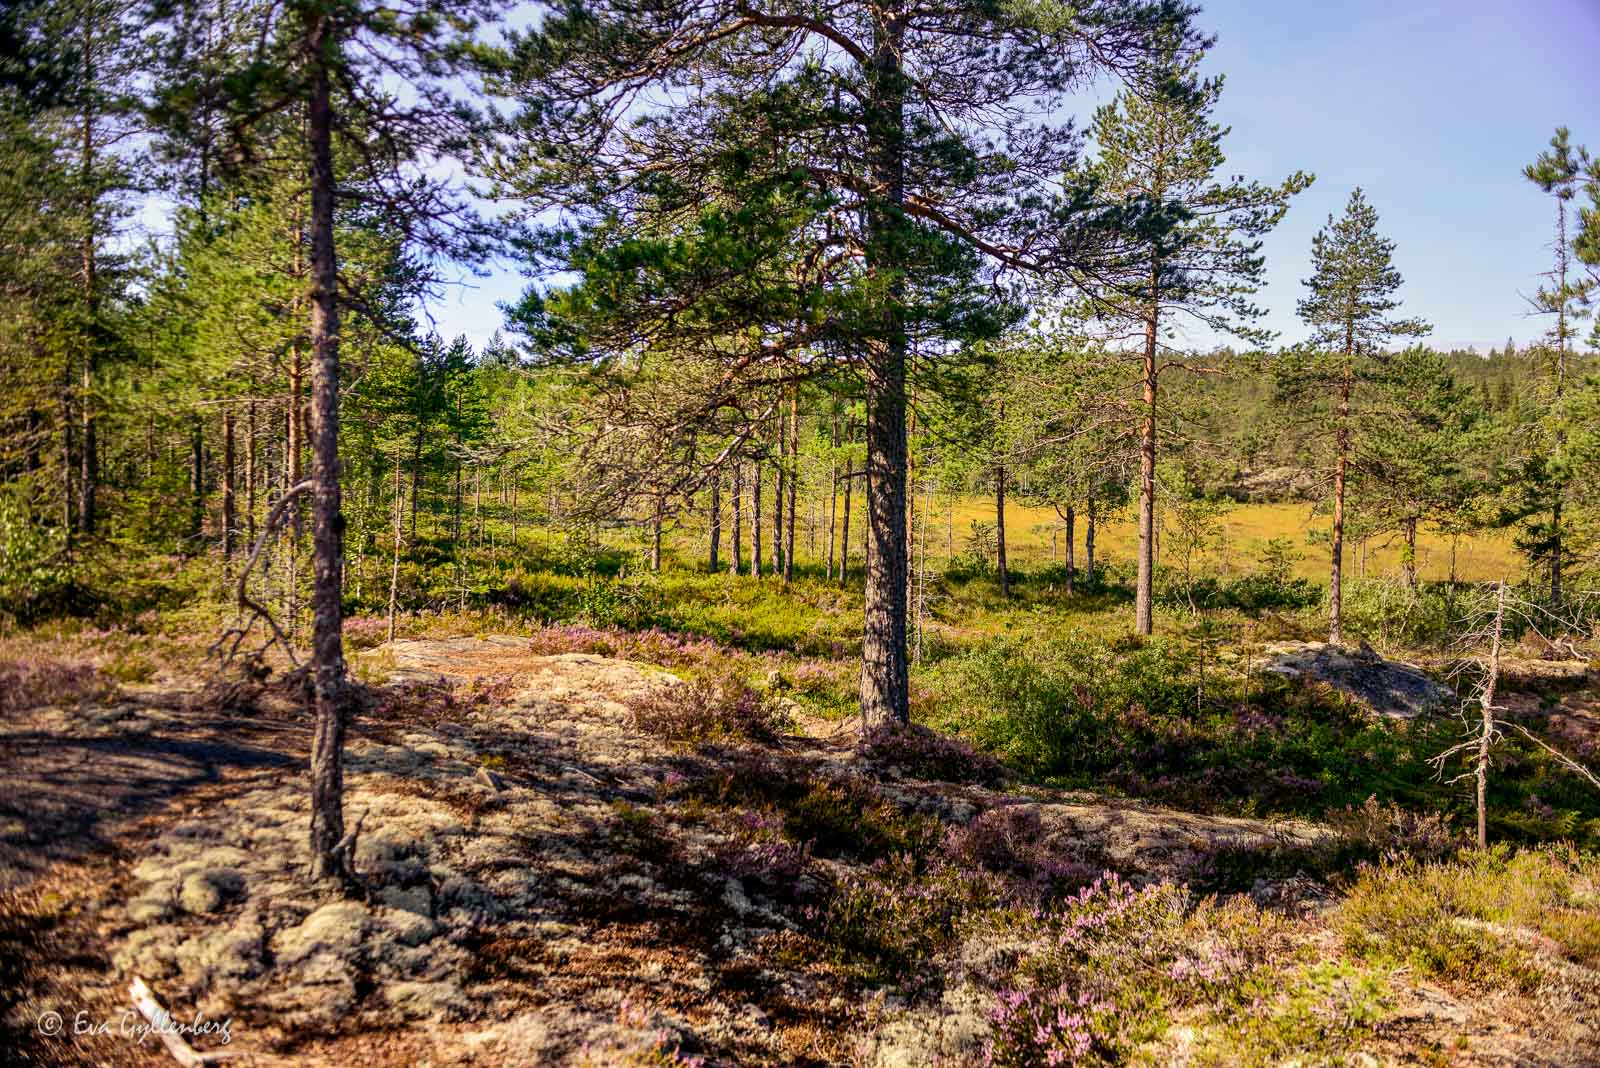 Hiking over heather fields and cliffs along the Höga Kusten trail